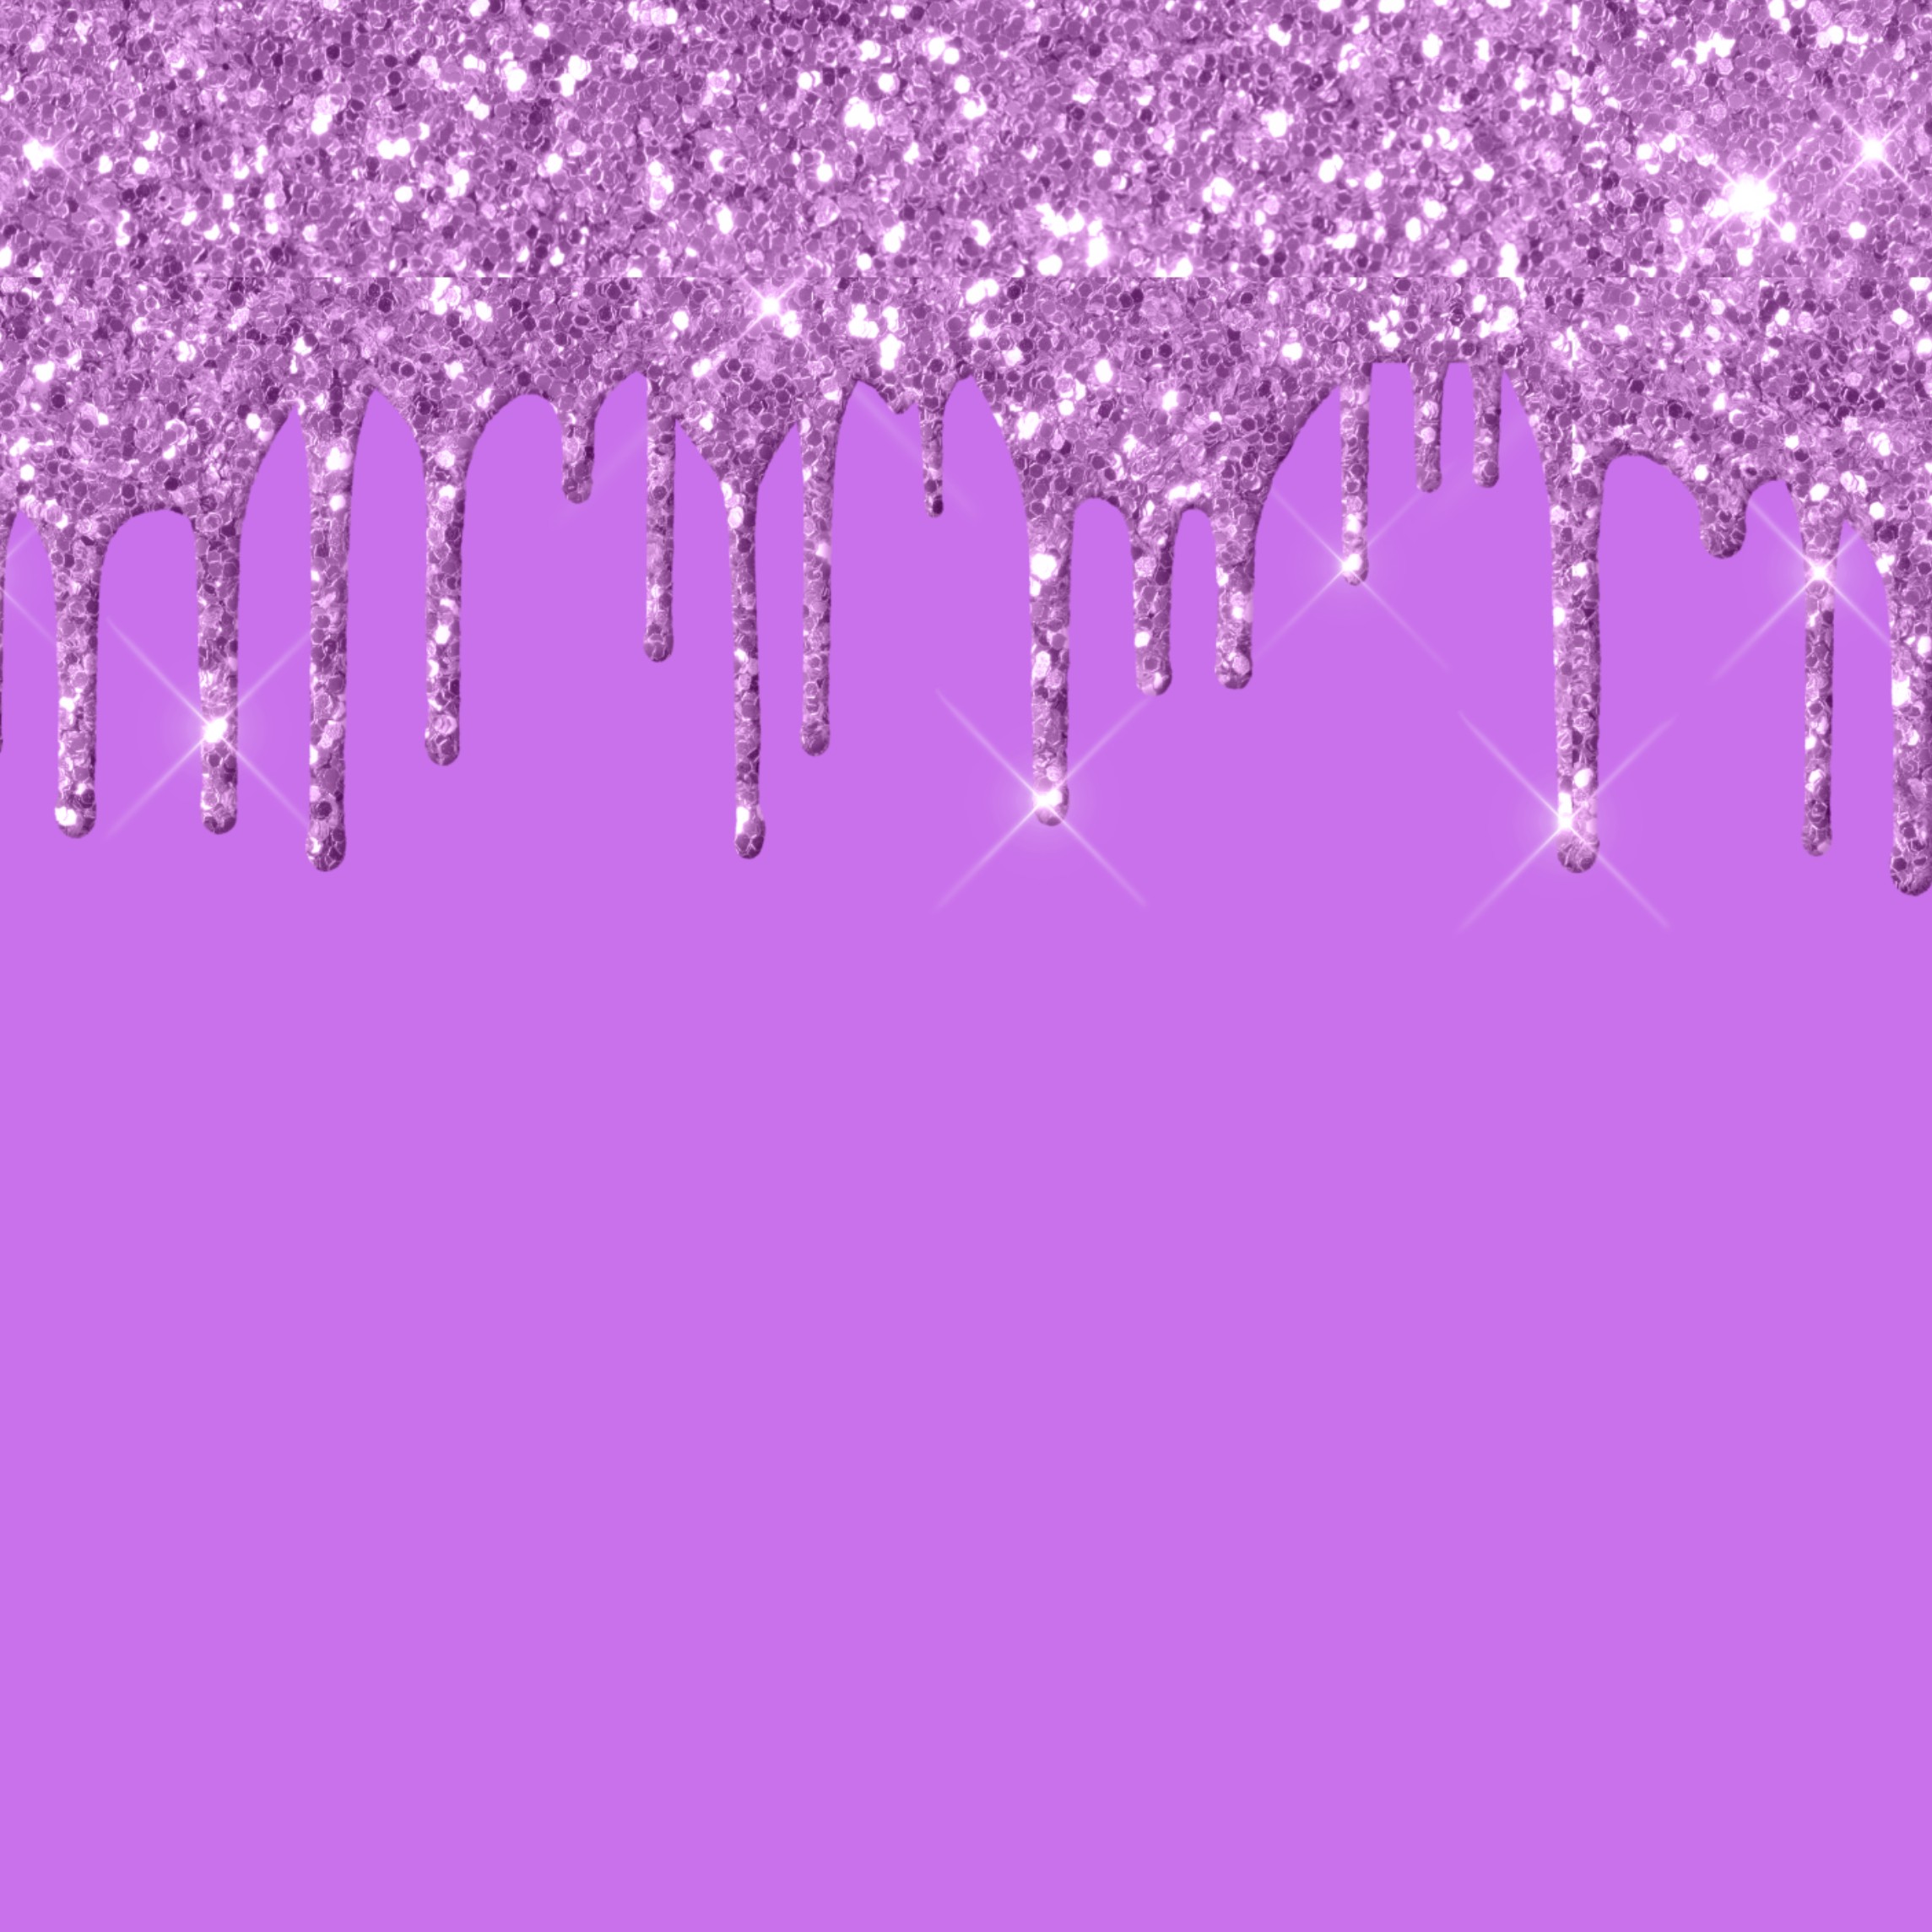 This visual is about background backgrounds pattern glitterbackground purpl...